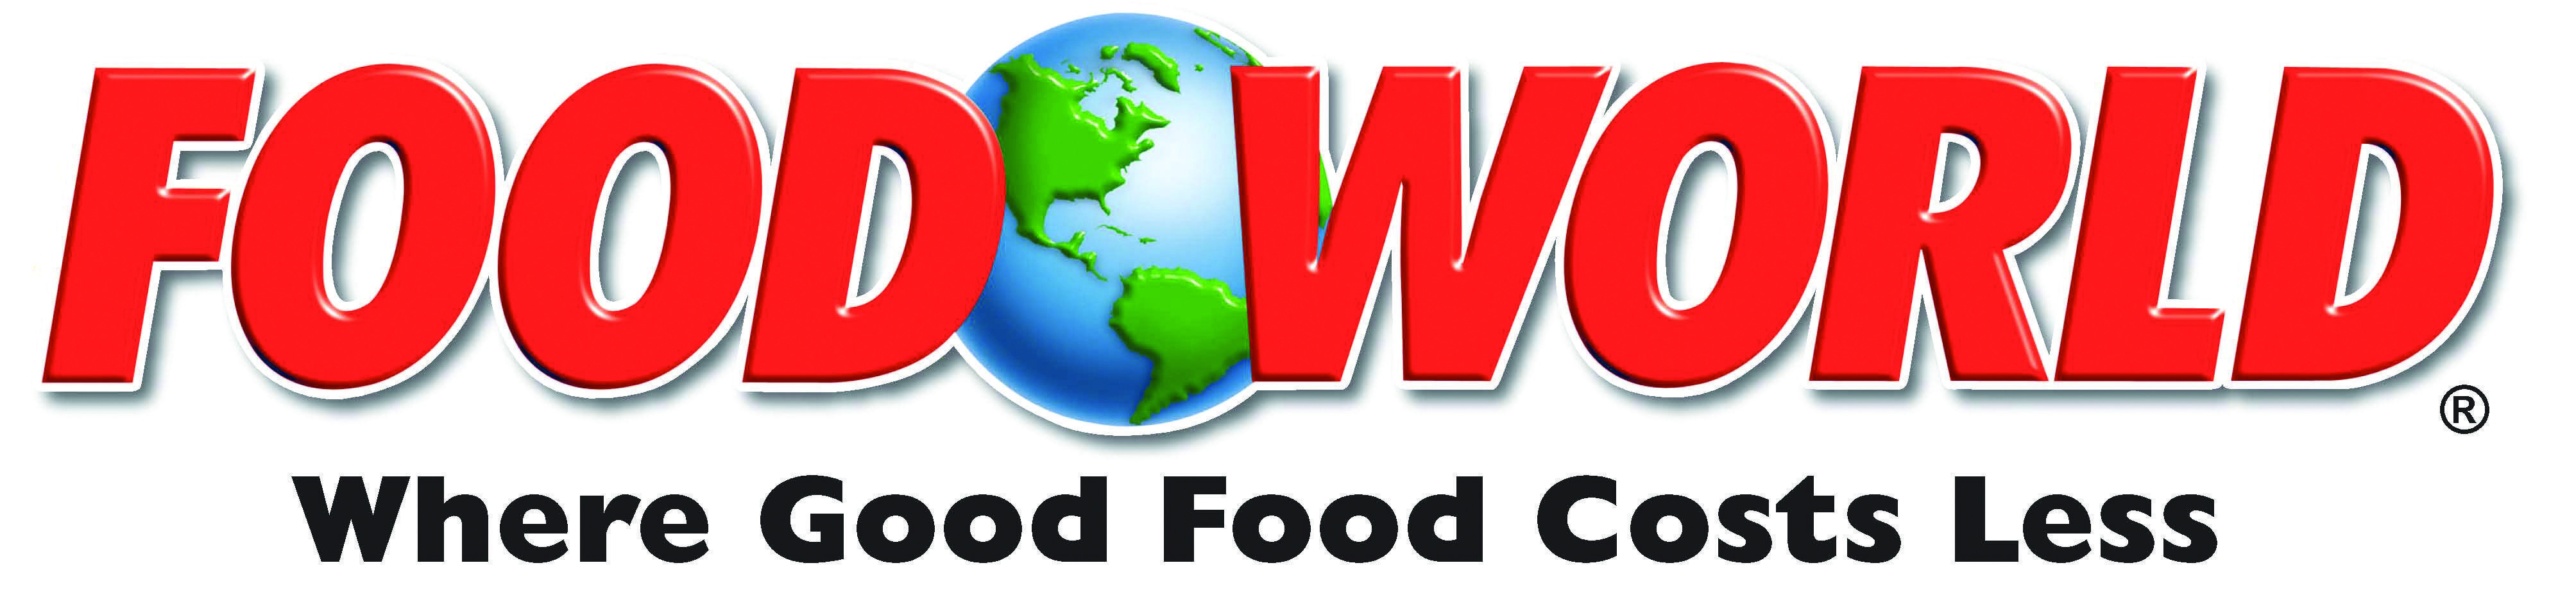 Food World Logo - Three Former Harvey's Stores In Georgia To Re Open As Food World